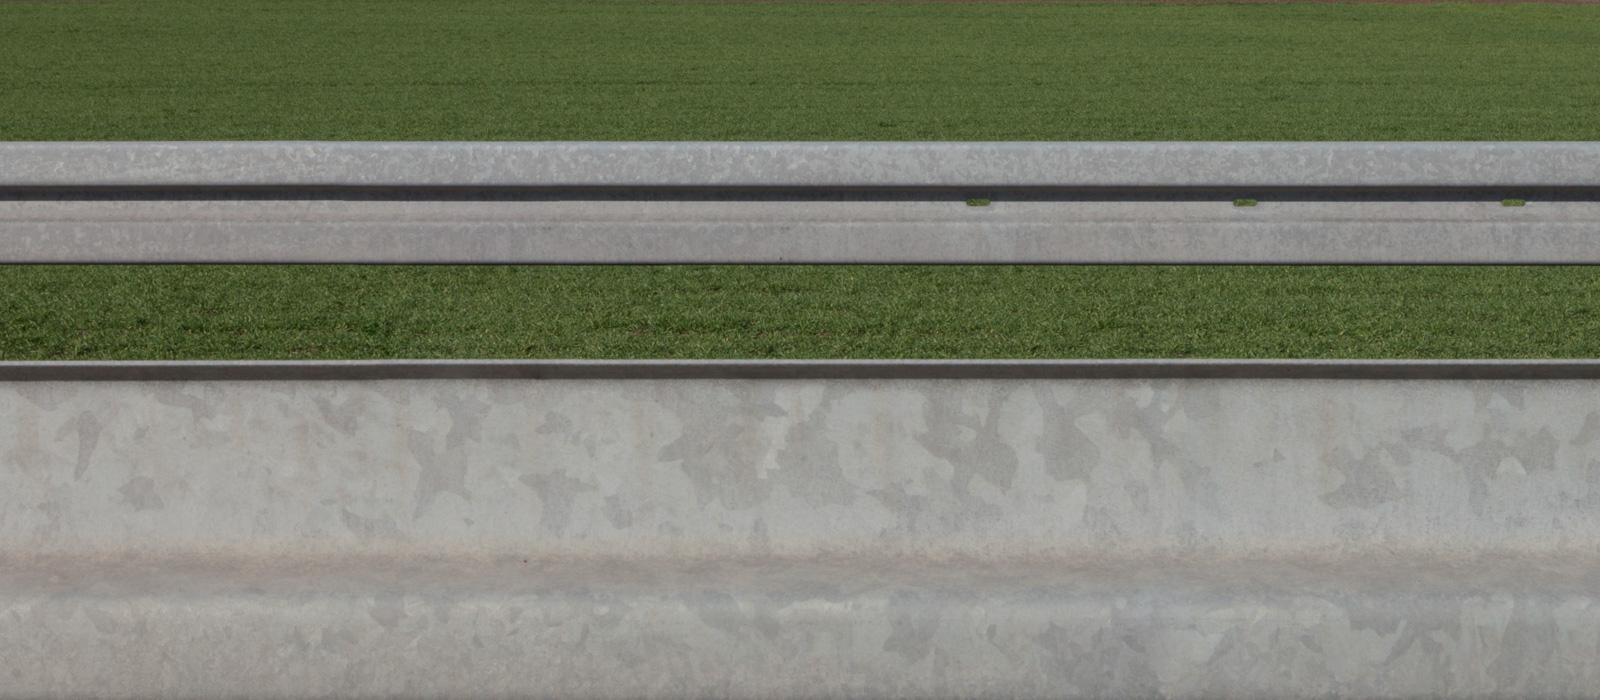 minimalistic horizontal image, showing two guardrails against grass – letting them seem two-dimensional